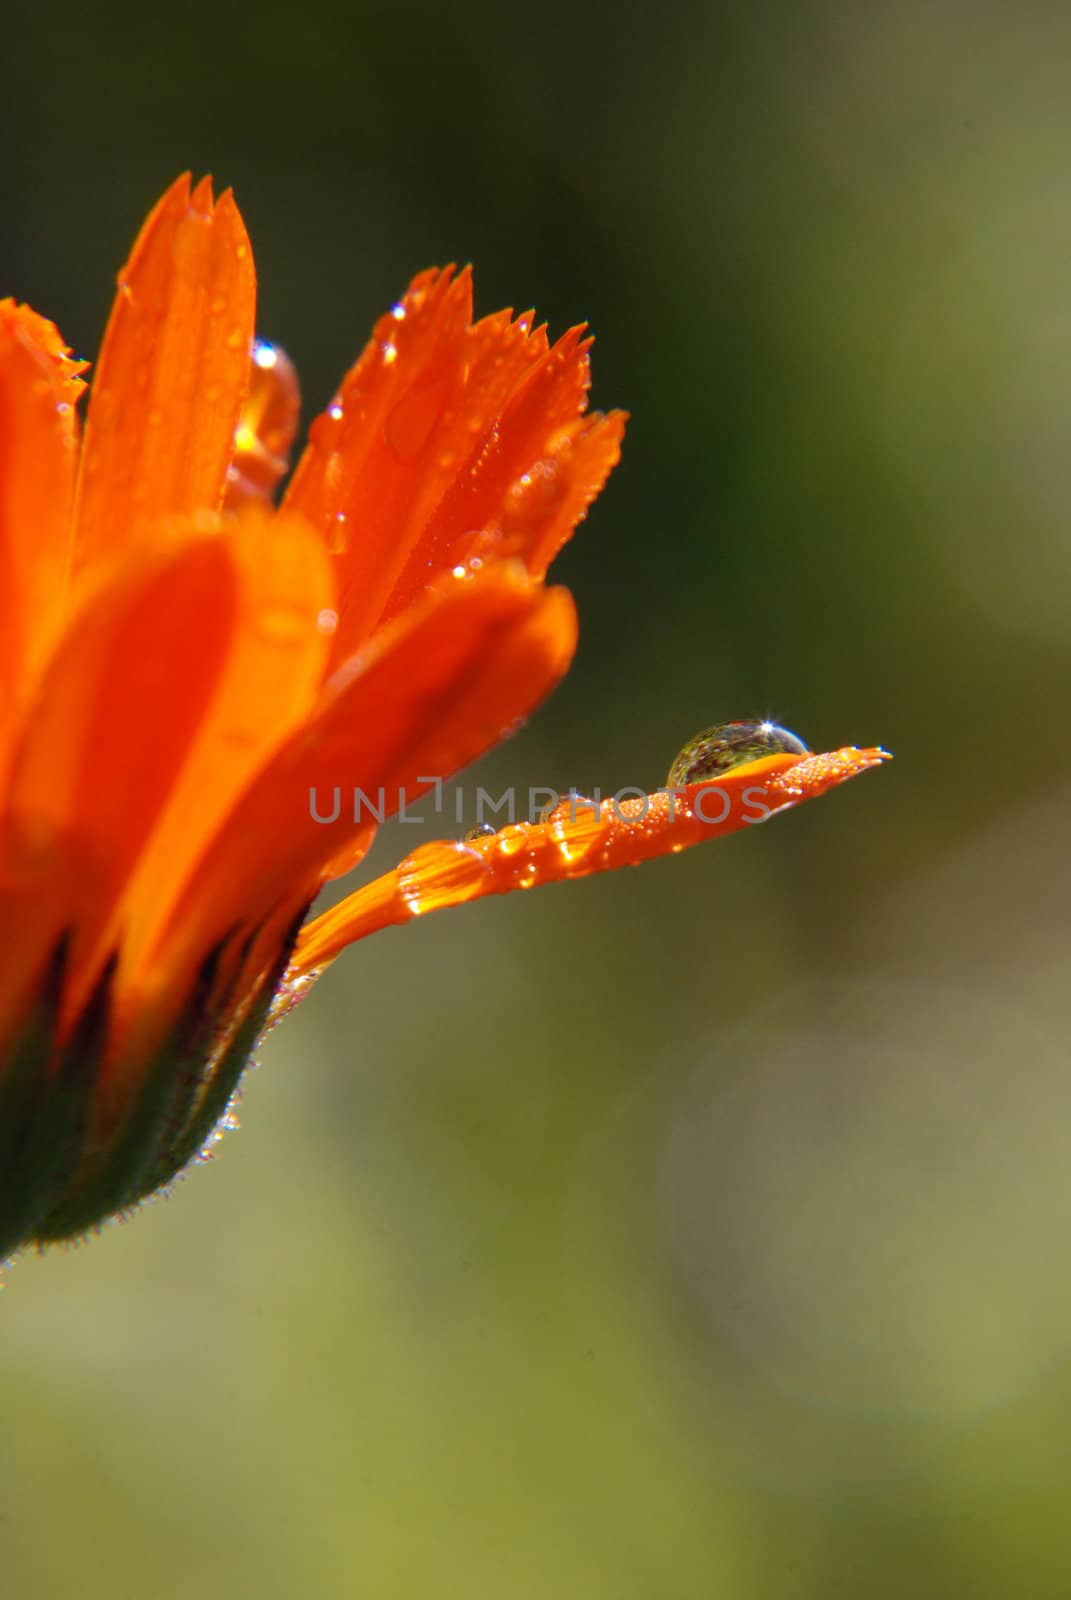 Some early morning dewdrops on beautiful marigold